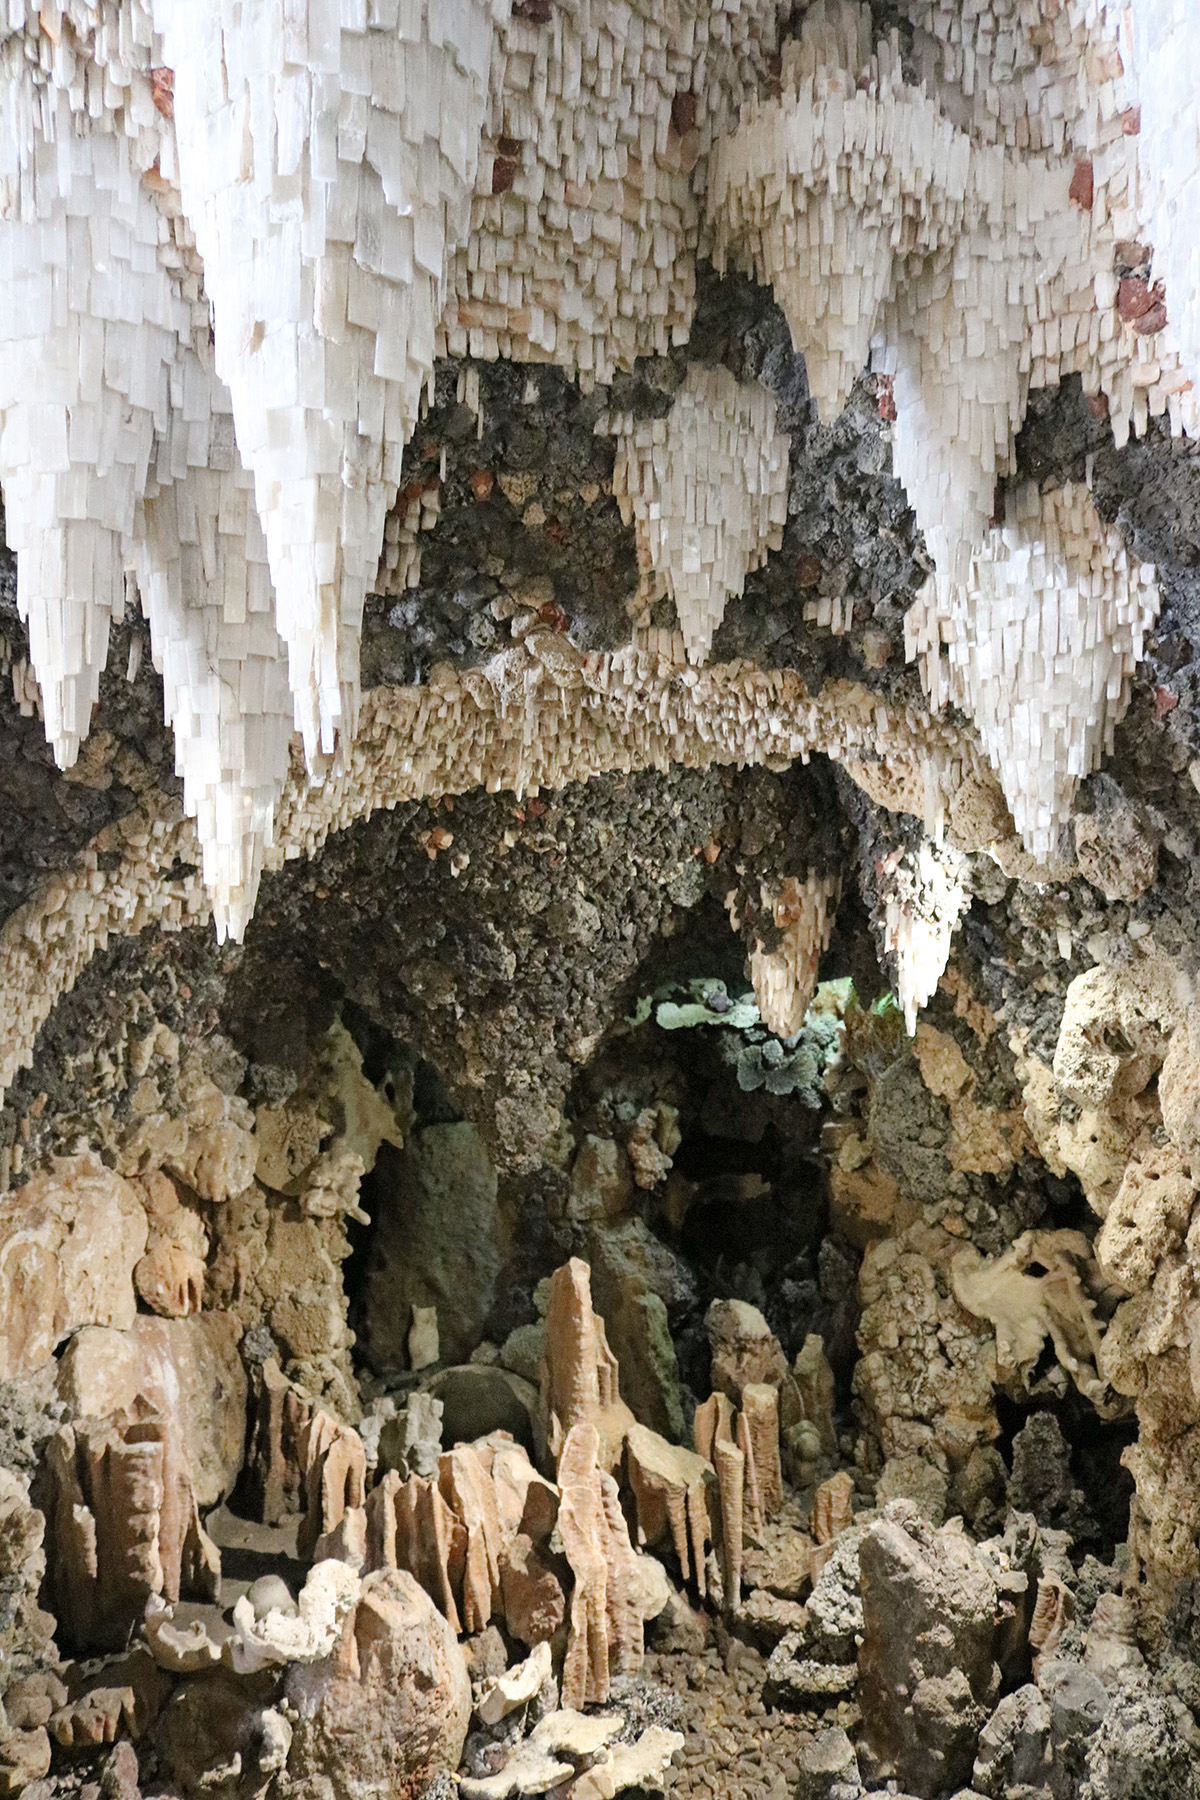 Inside the crystal grotto in Painshill Park, Cobham, Surrey